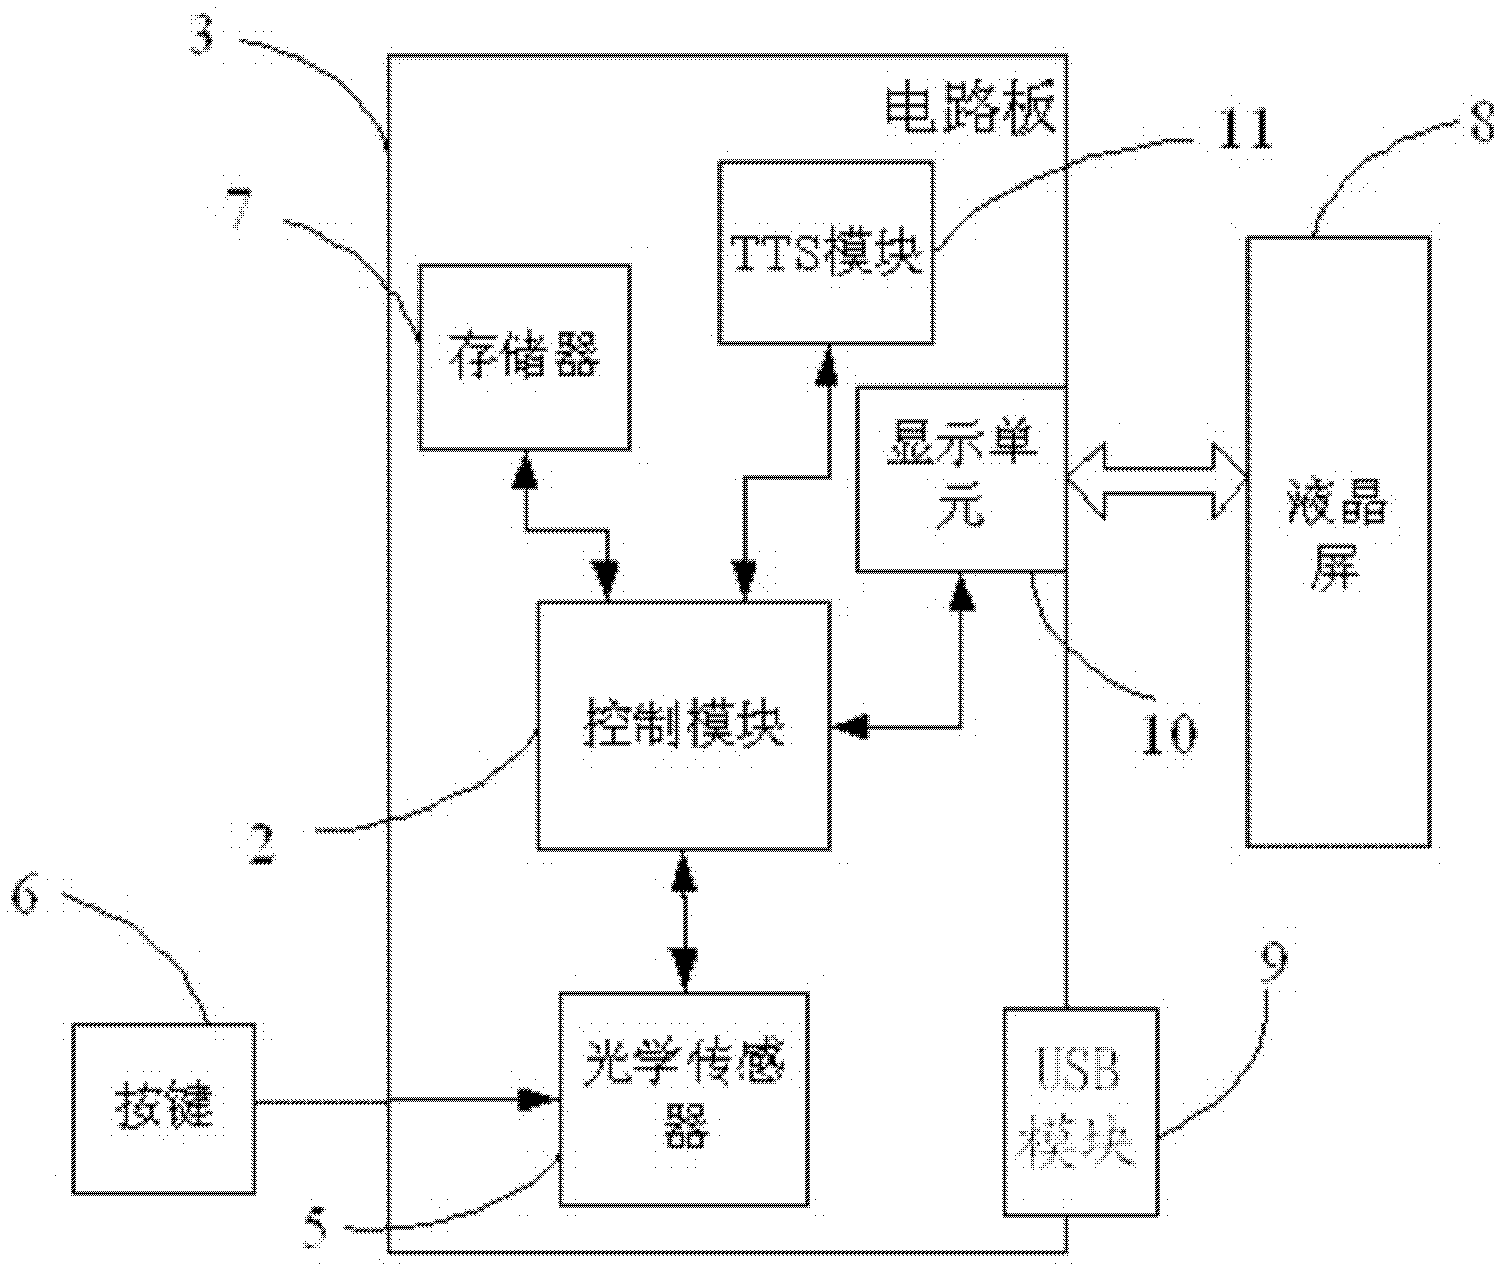 Frame-skipping scanning and recognizing device and method